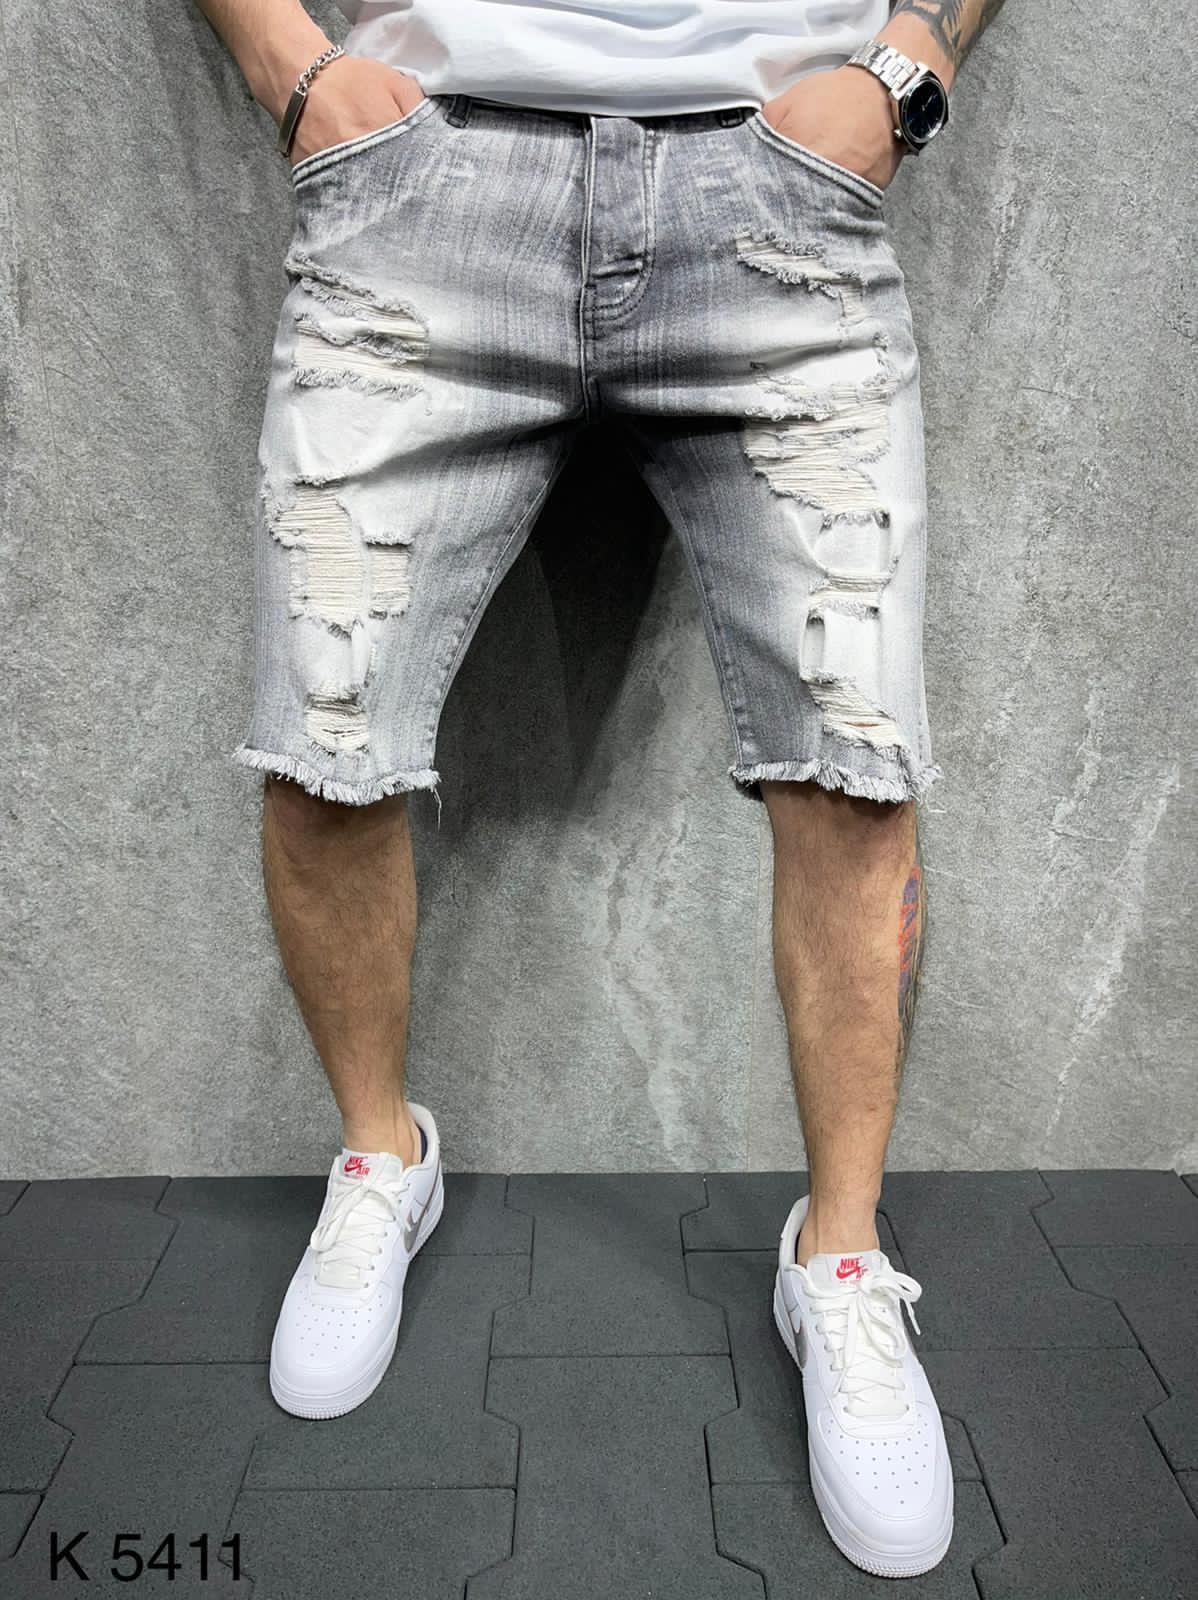 Daily Ripped Jeans Shorts